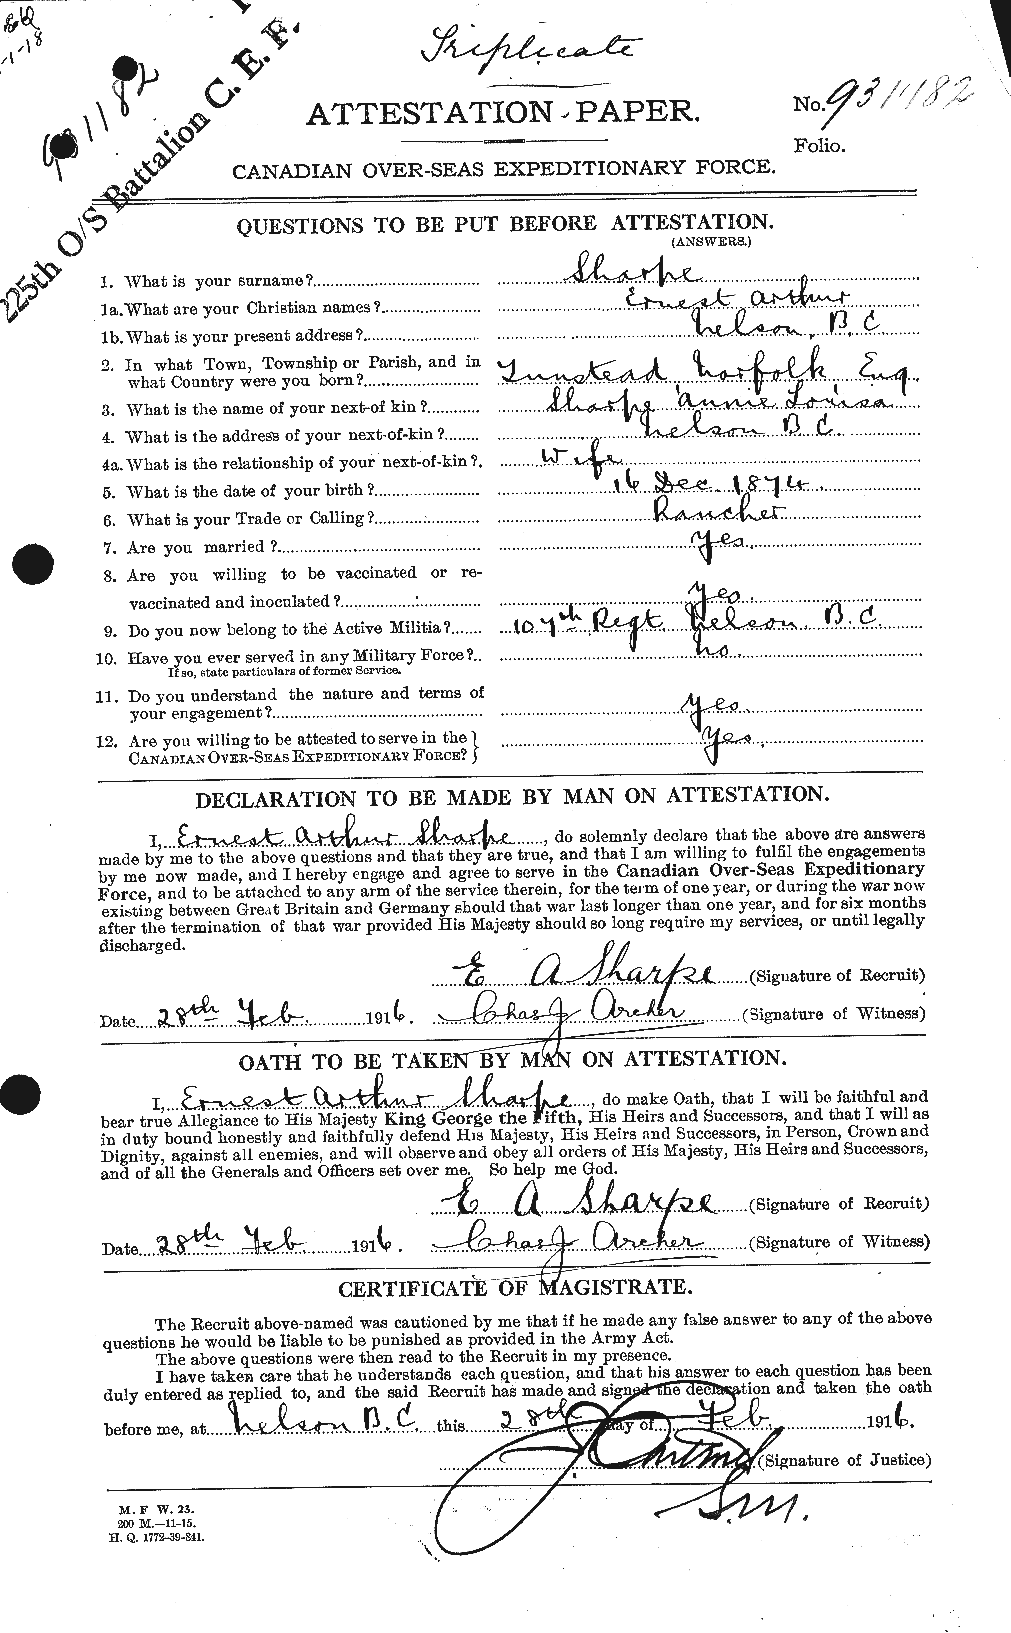 Personnel Records of the First World War - CEF 091546a